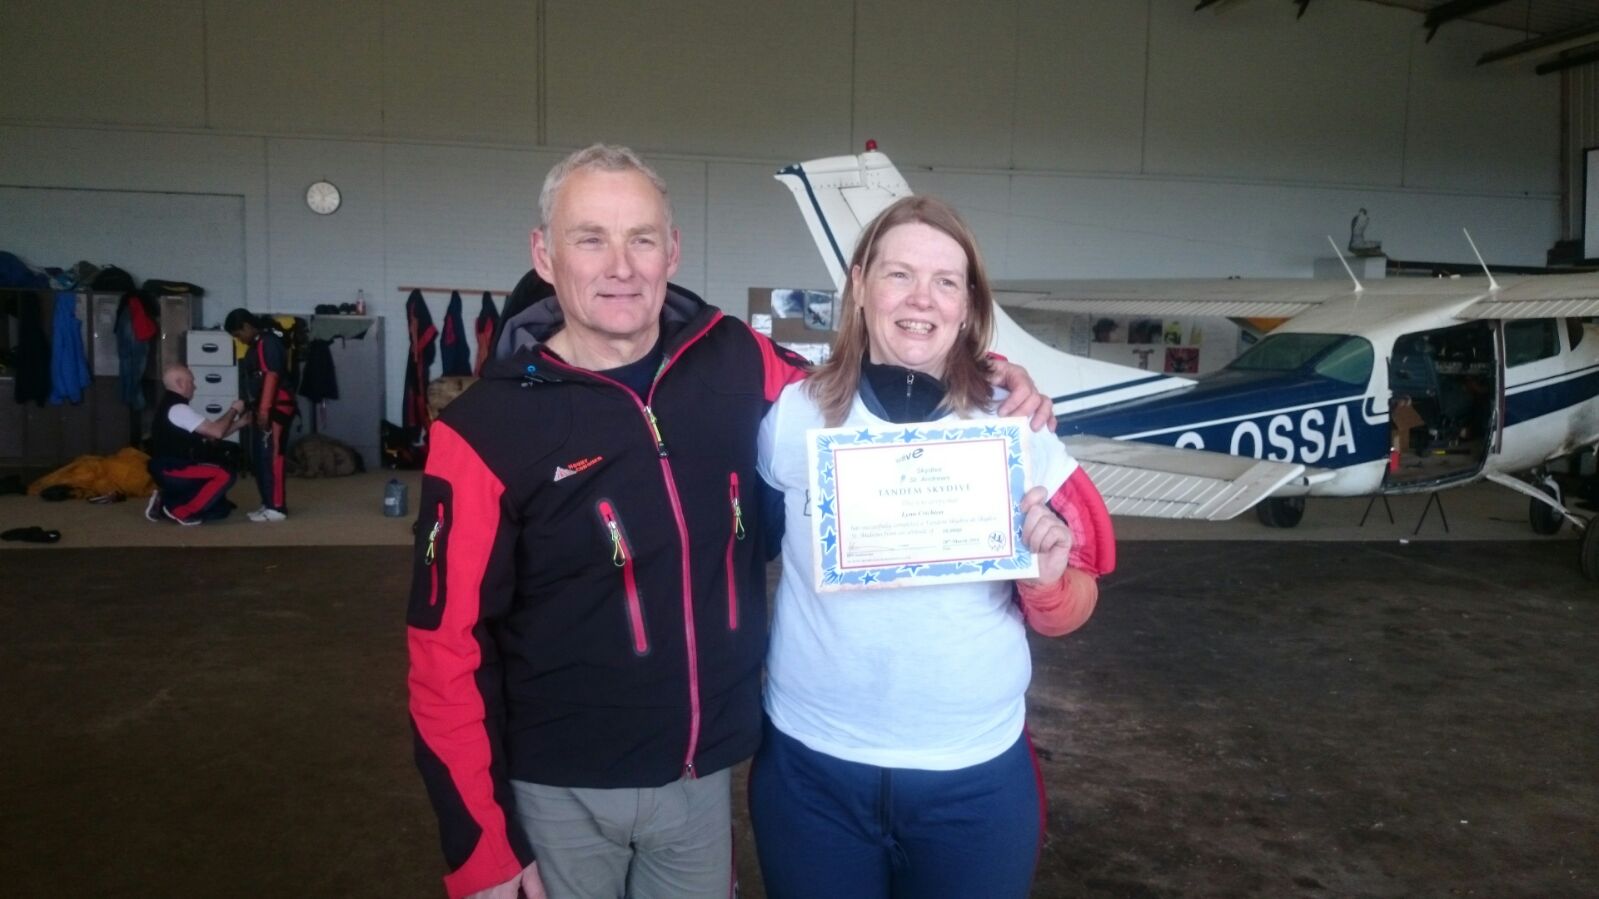 Liz with skydive instructor